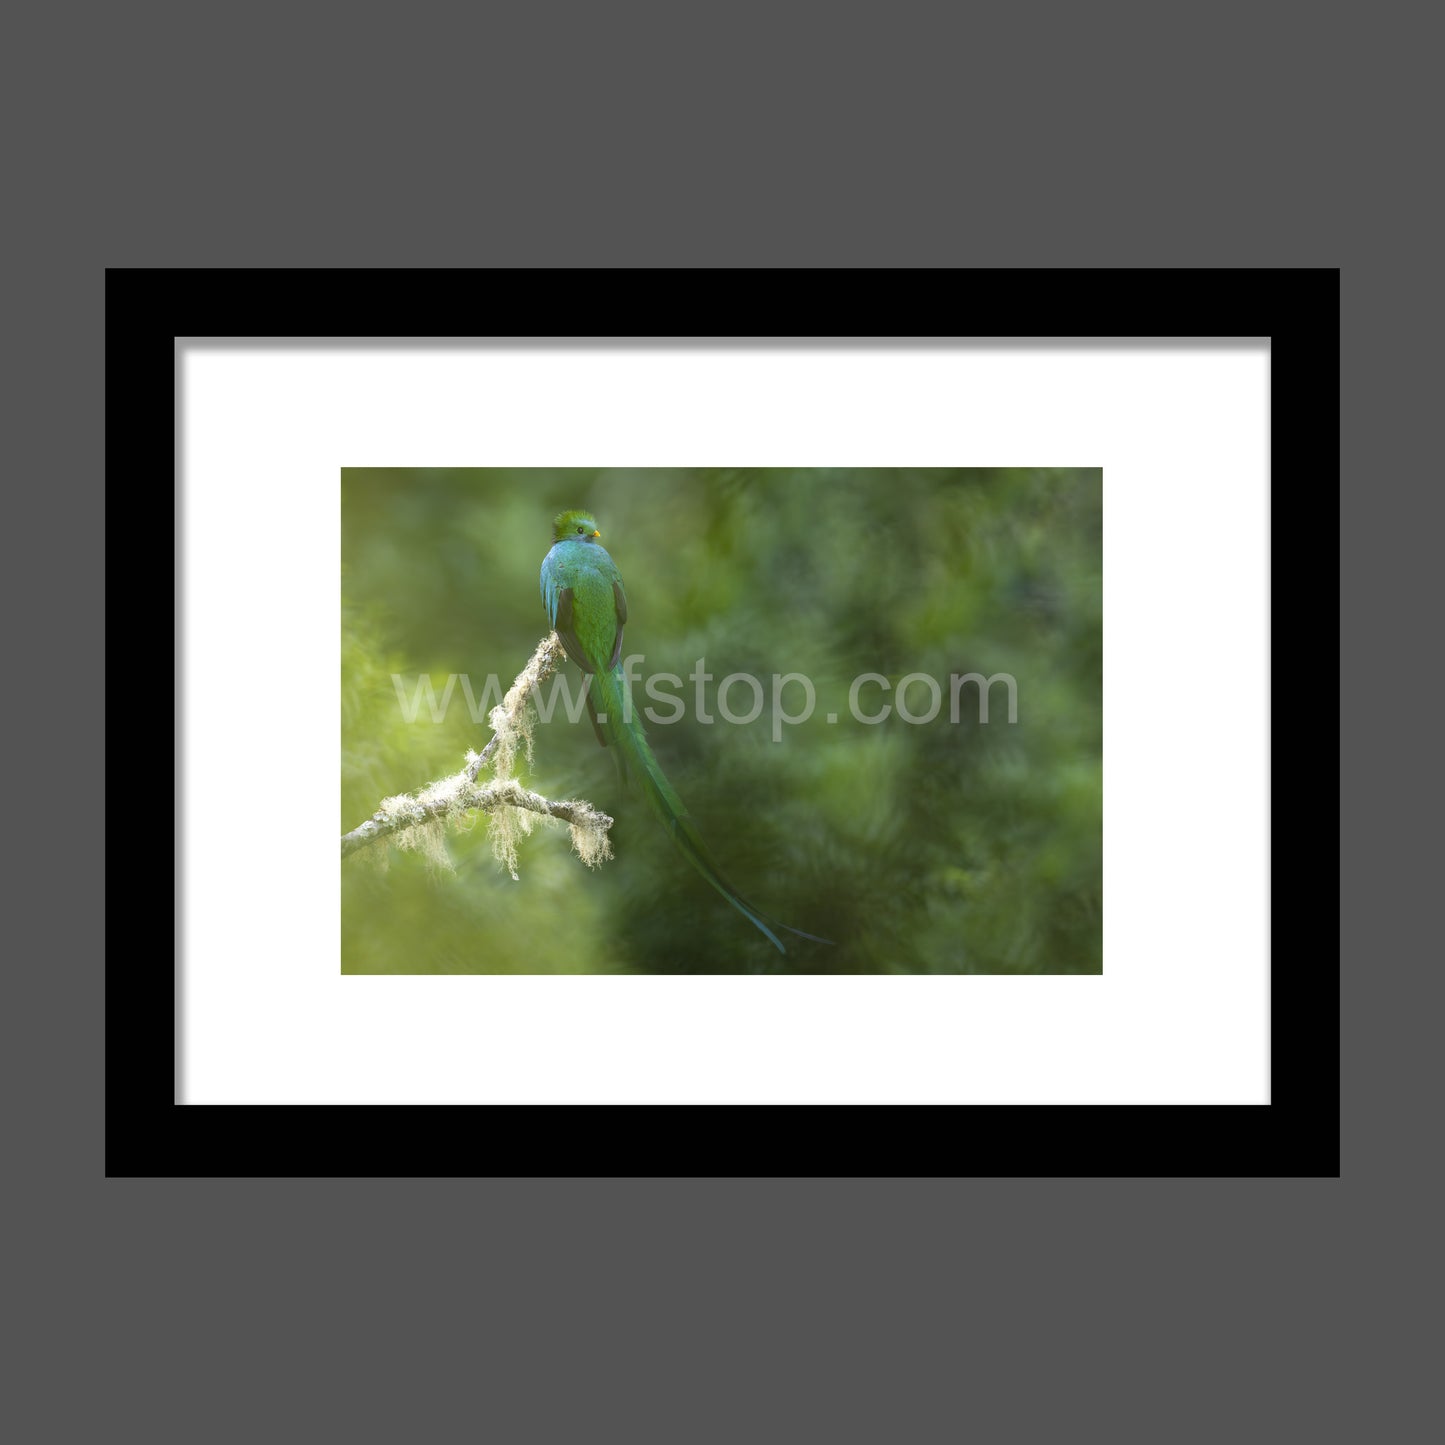 Resplendent quetzal in the Mist  - WATERMARKS will not appear on finished products